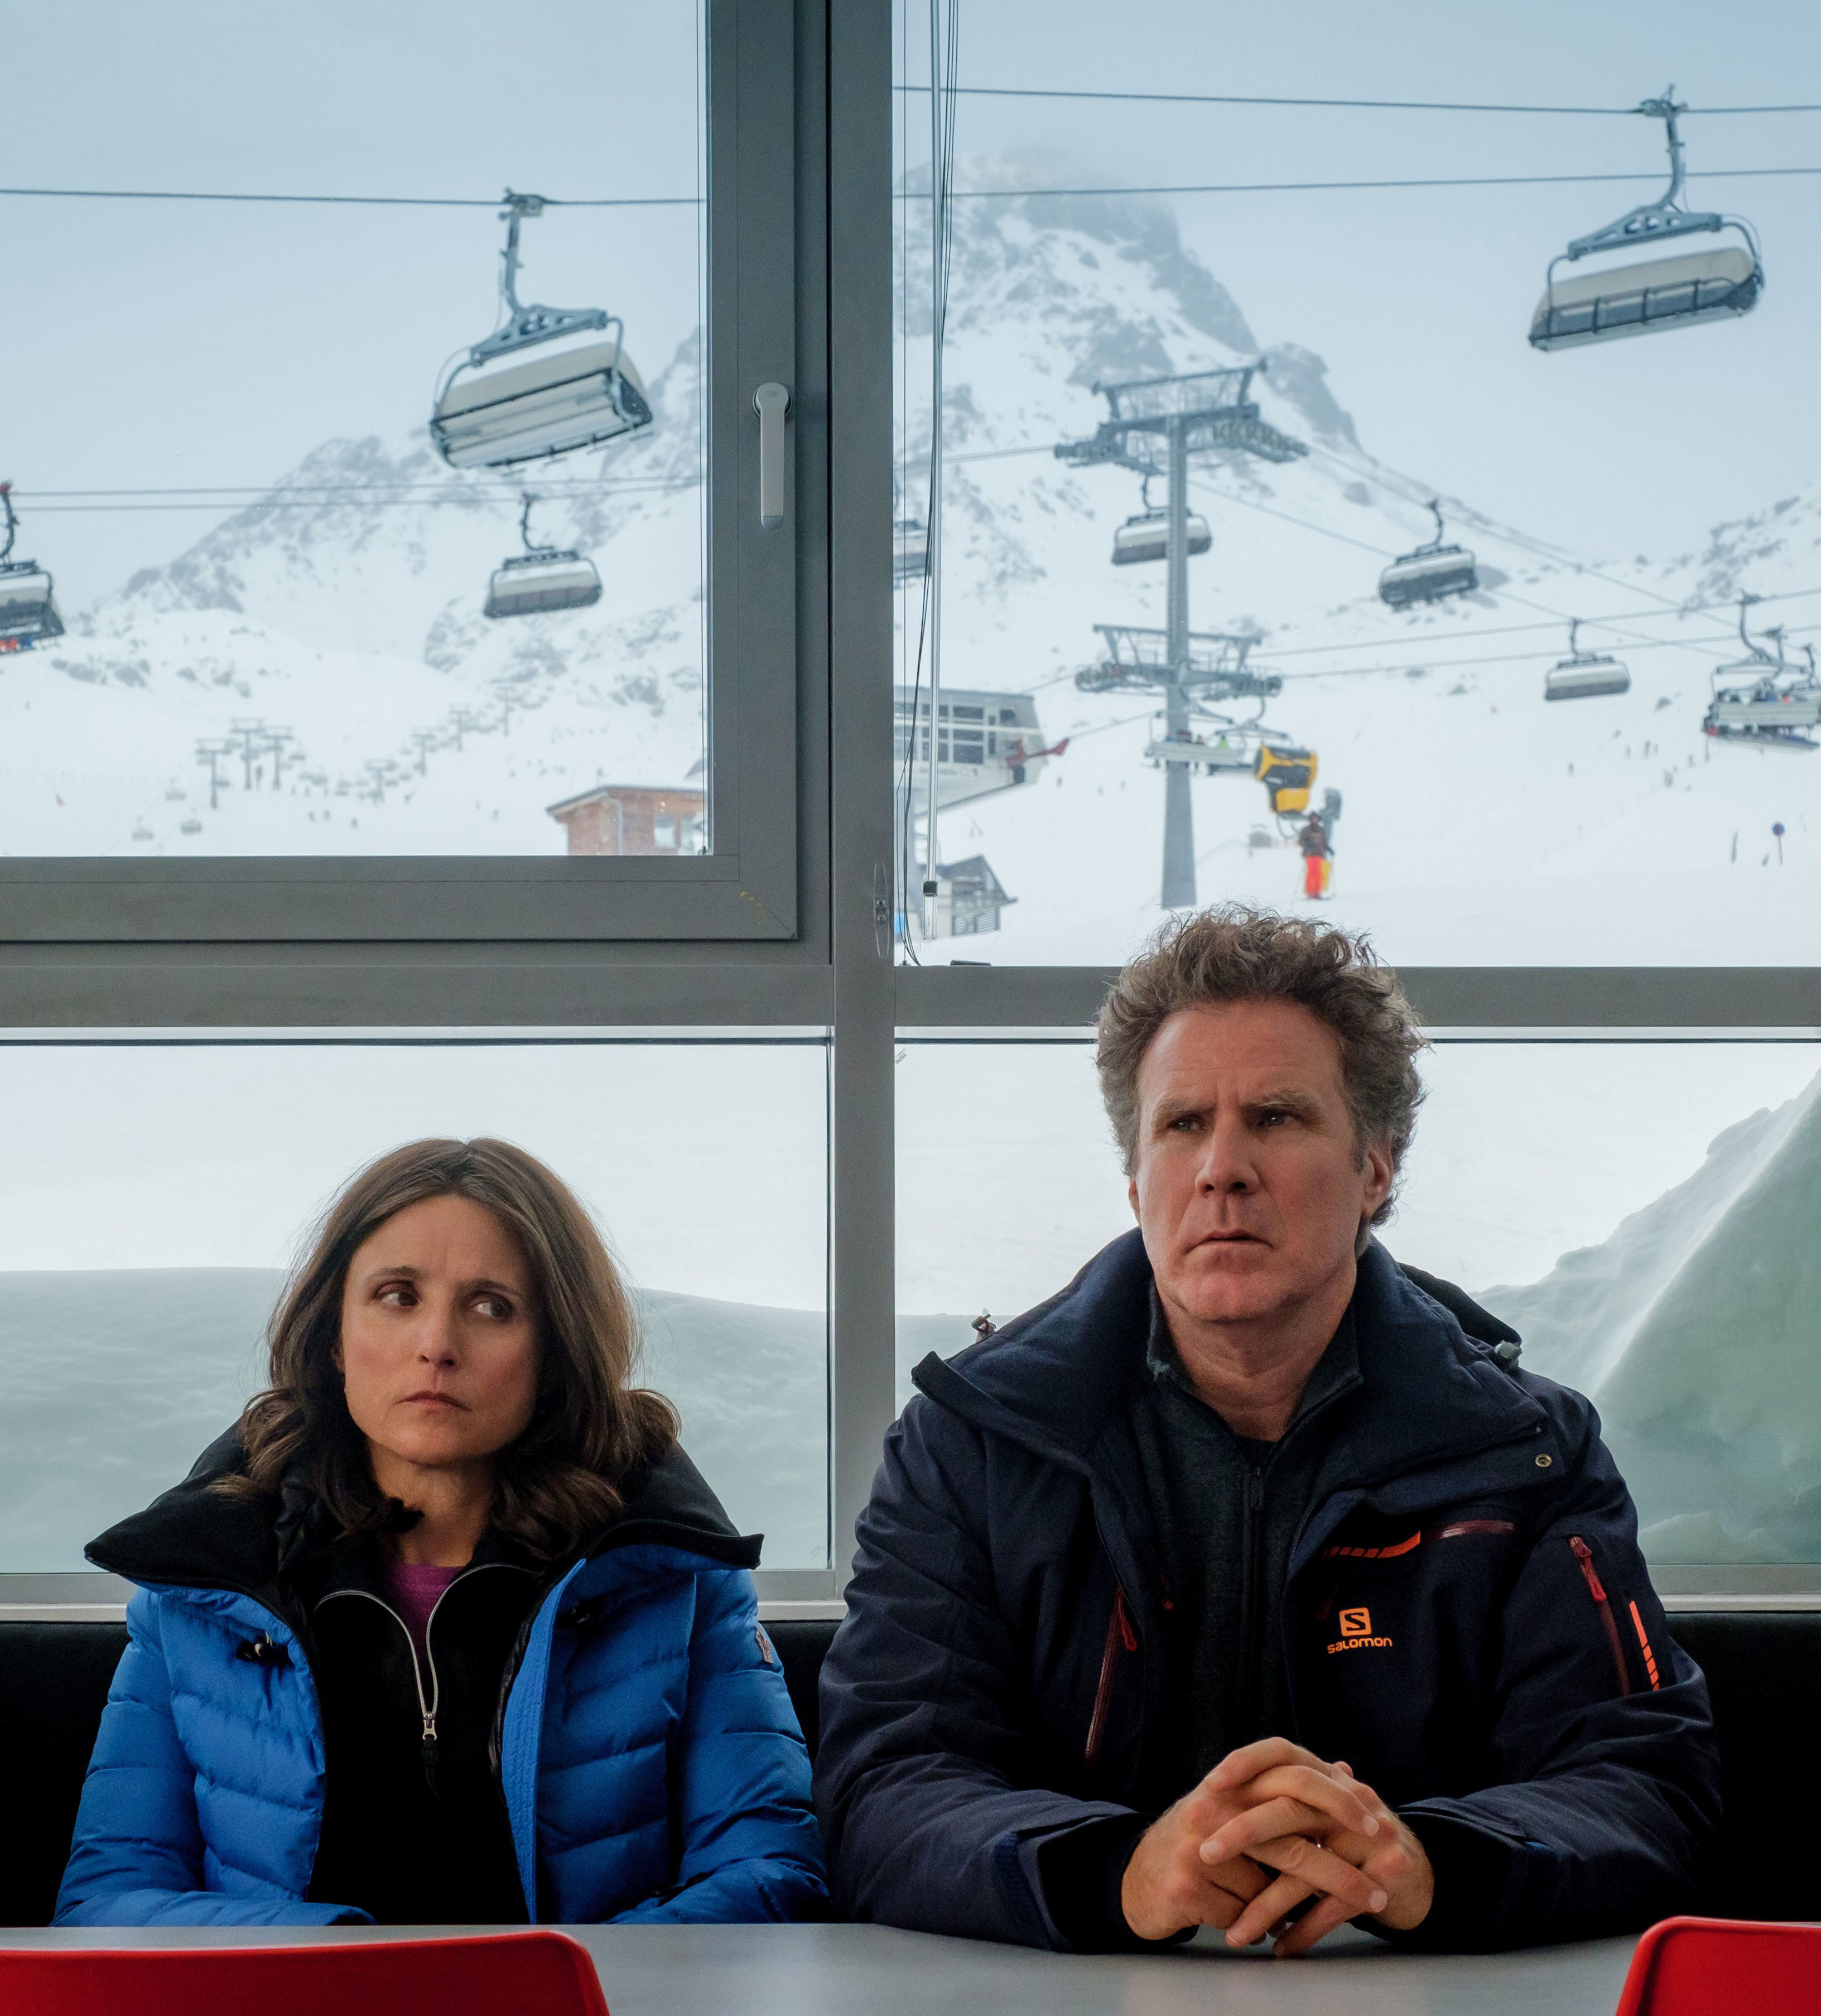 <p>In "Downhill," which debuted at the <a href="https://www.wonderwall.com/celebrity/photos/2020-sundance-film-festival-see-all-stars-film-festival-3022094.gallery">2020 Sundance Film Festival</a>, Will Ferrell and <a href="https://www.wonderwall.com/celebrity/profiles/overview/julia-louis-dreyfus-1190.article">Julia Louis-Dreyfus</a> starred as a married couple who reassess their lives and feelings for each other after a harrowing near-death experience on a family ski trip in the Alps. The dark comedy -- a remake of the 2014 Swedish film "Force Majeure" -- was deemed unmemorable and less successful than the original.</p>